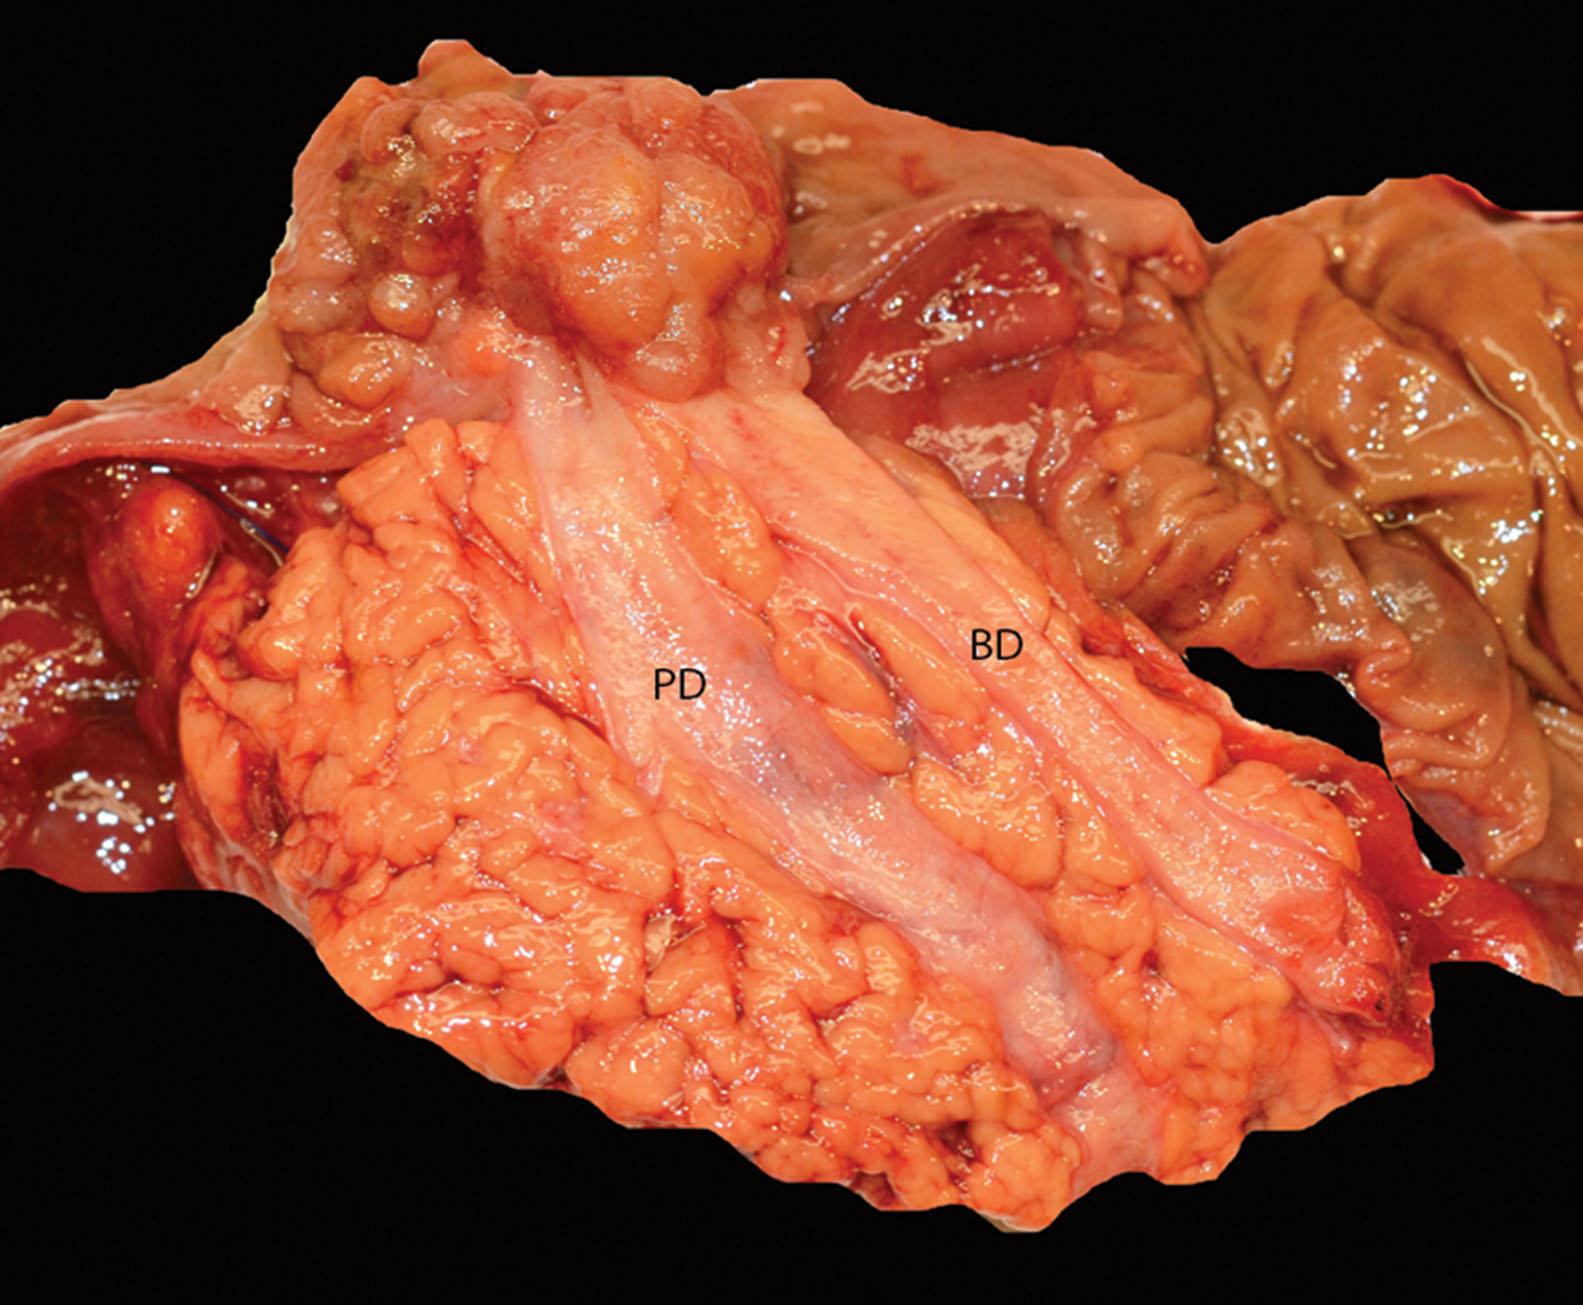 Figure 6.13, Gross appearance of an ampullary adenocarcinoma, periampullary duodenal type with tumor surrounding the papilla of Vater with prominent polypoid involvement of the duodenal surface of the papilla. Both the pancreatic duct (PD) and common bile duct (BD) are dilated.